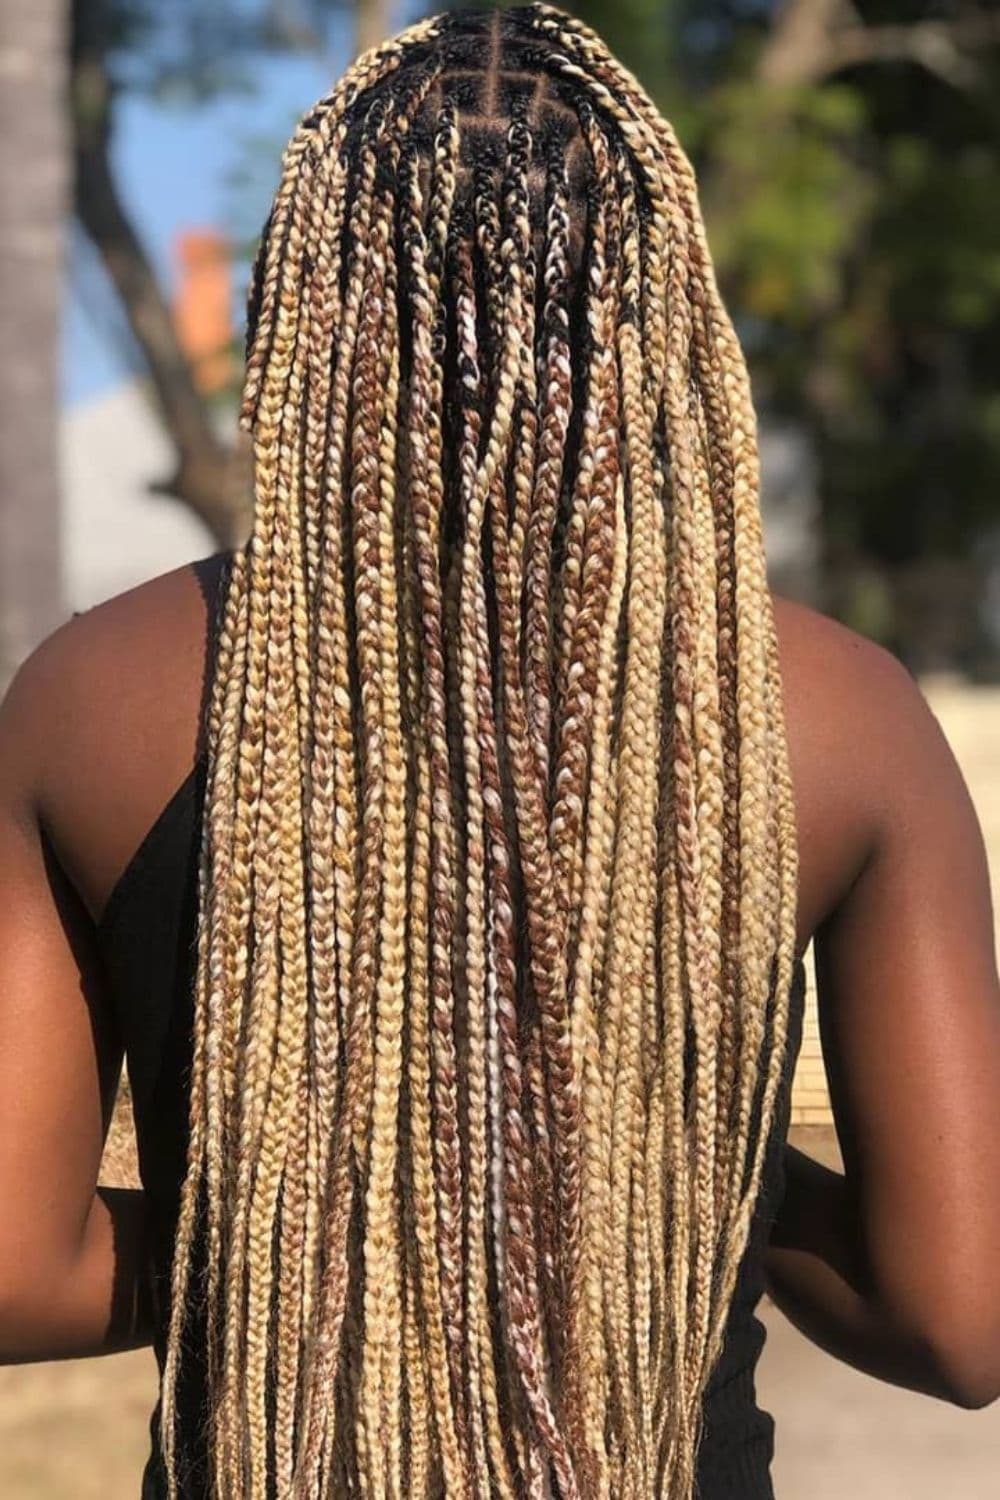 A woman's hair with mixed blonde knotless braids.